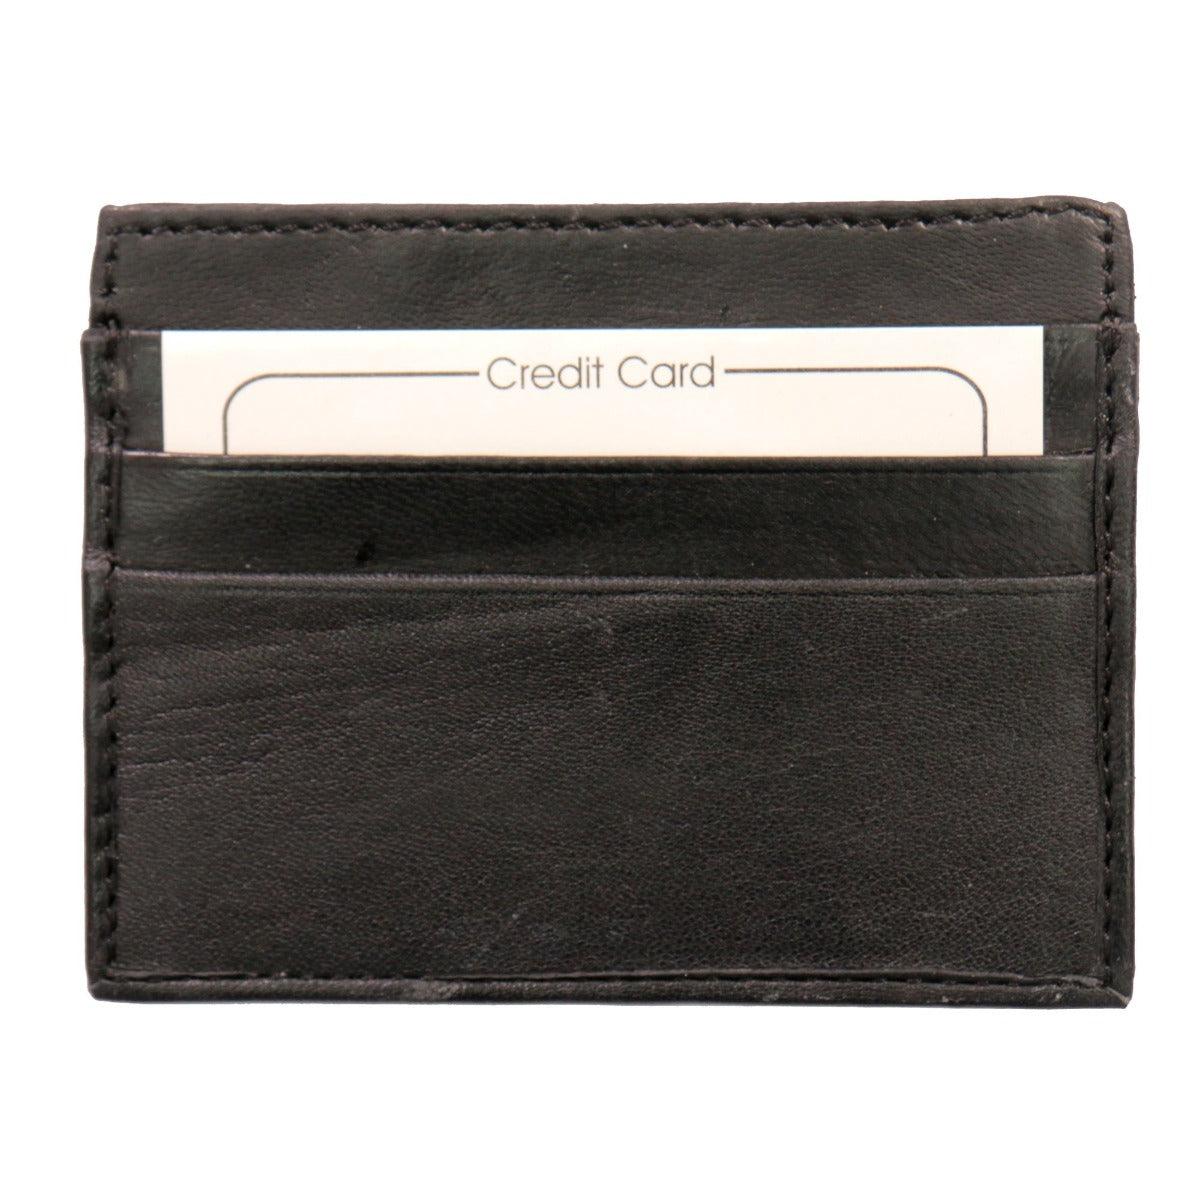 Hot Leathers Black Credit Card Holding Wallet - American Legend Rider